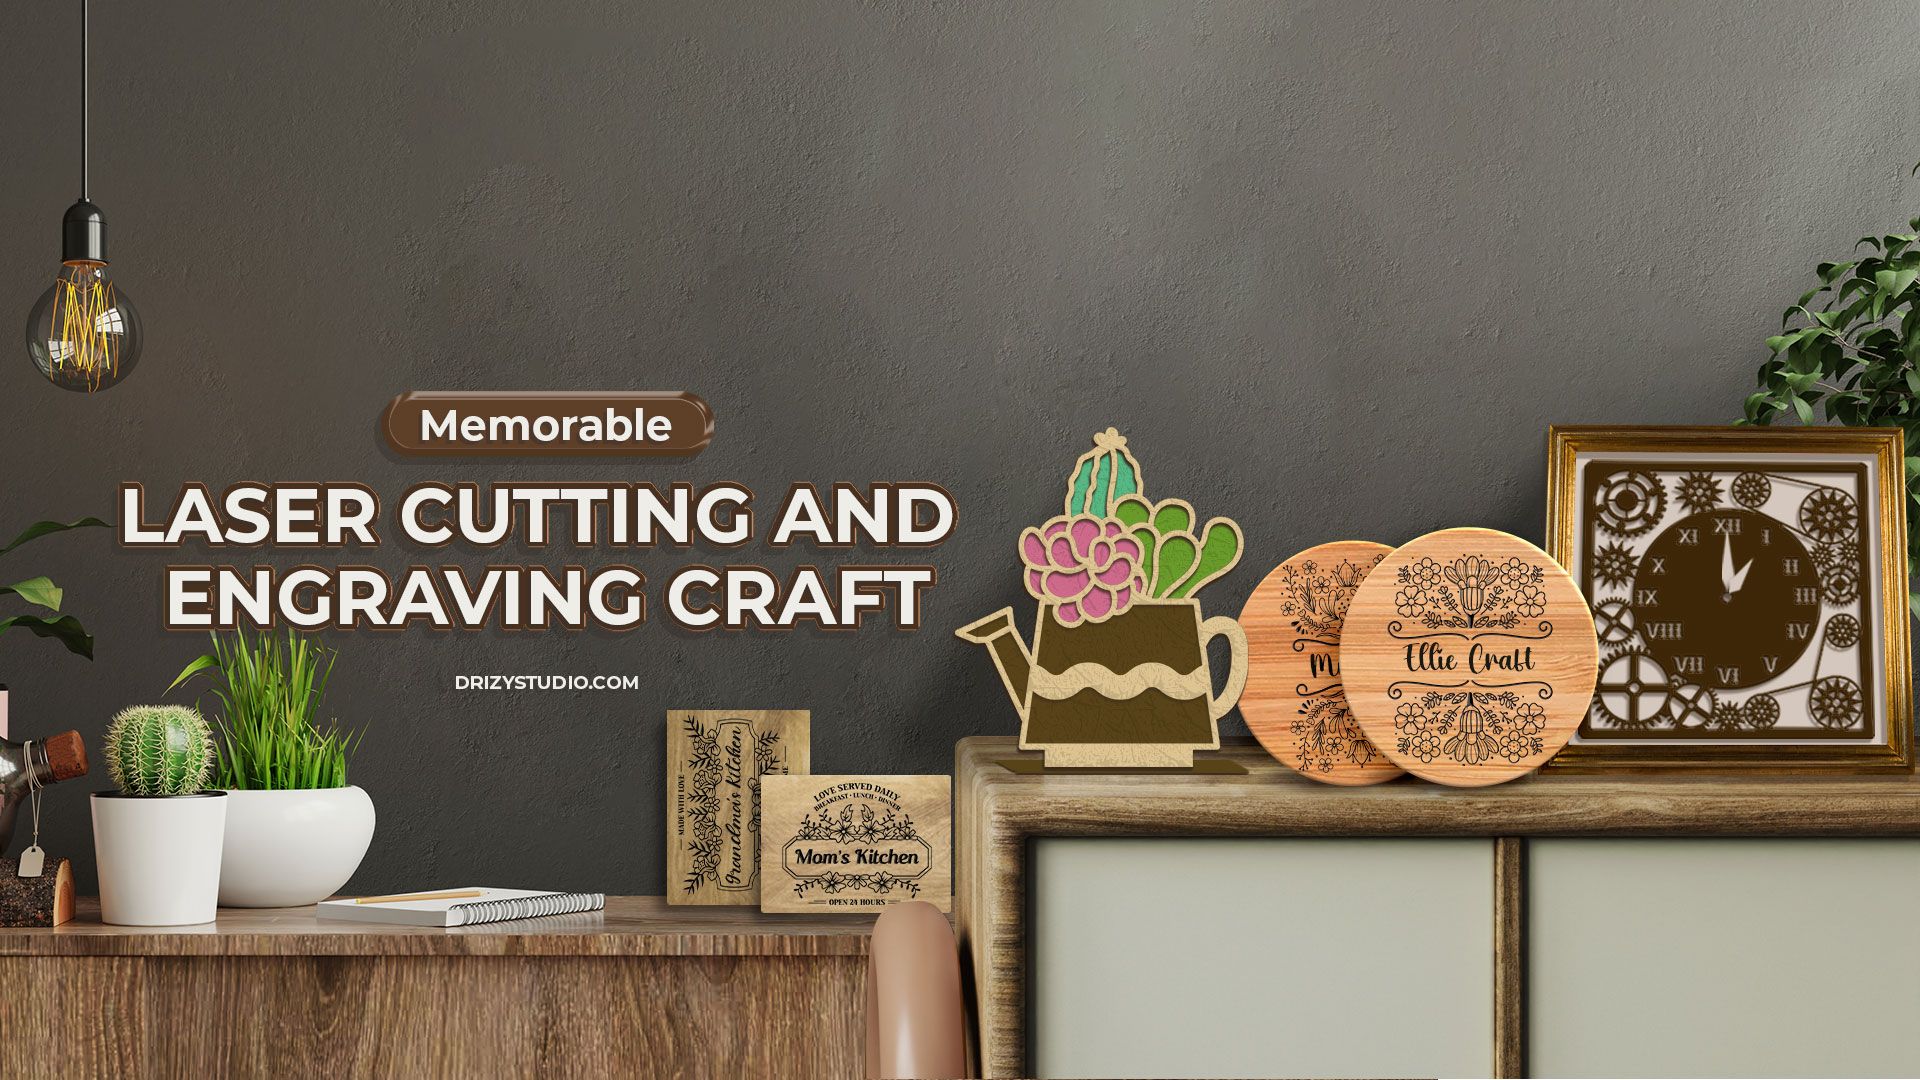 Ideas for Memorable Laser Cutting and Engraving Craft